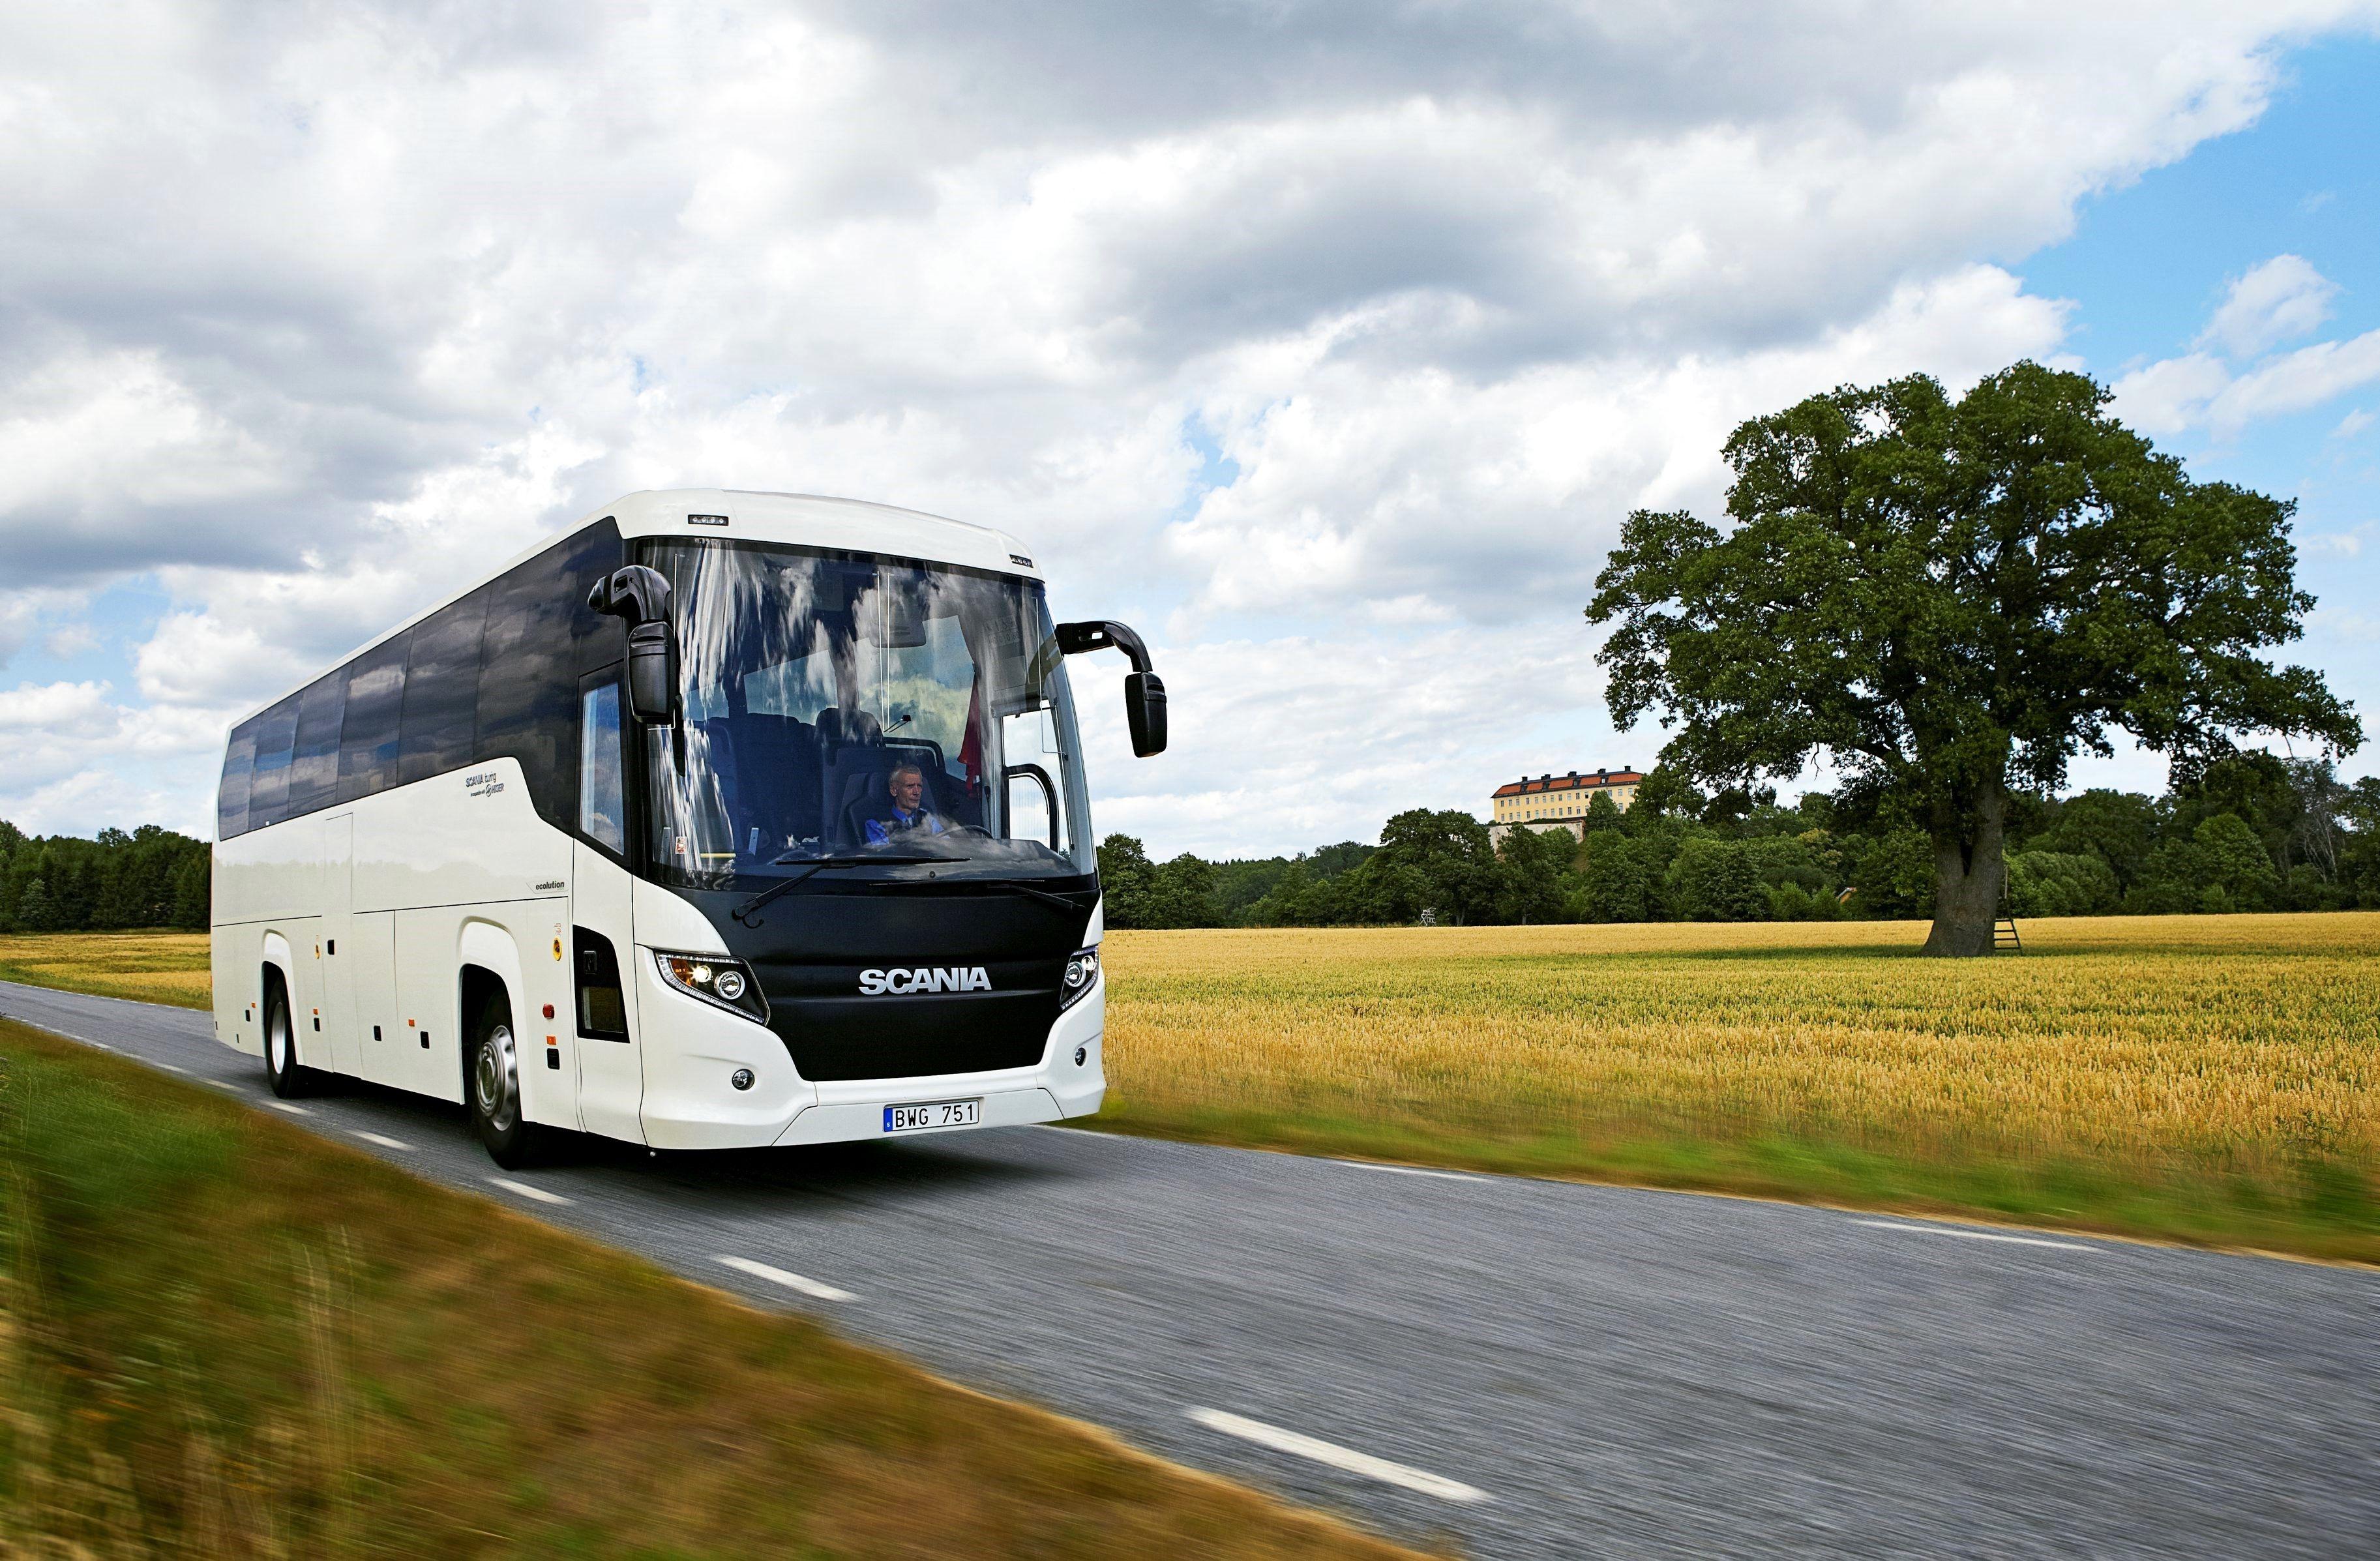 free travel bus images